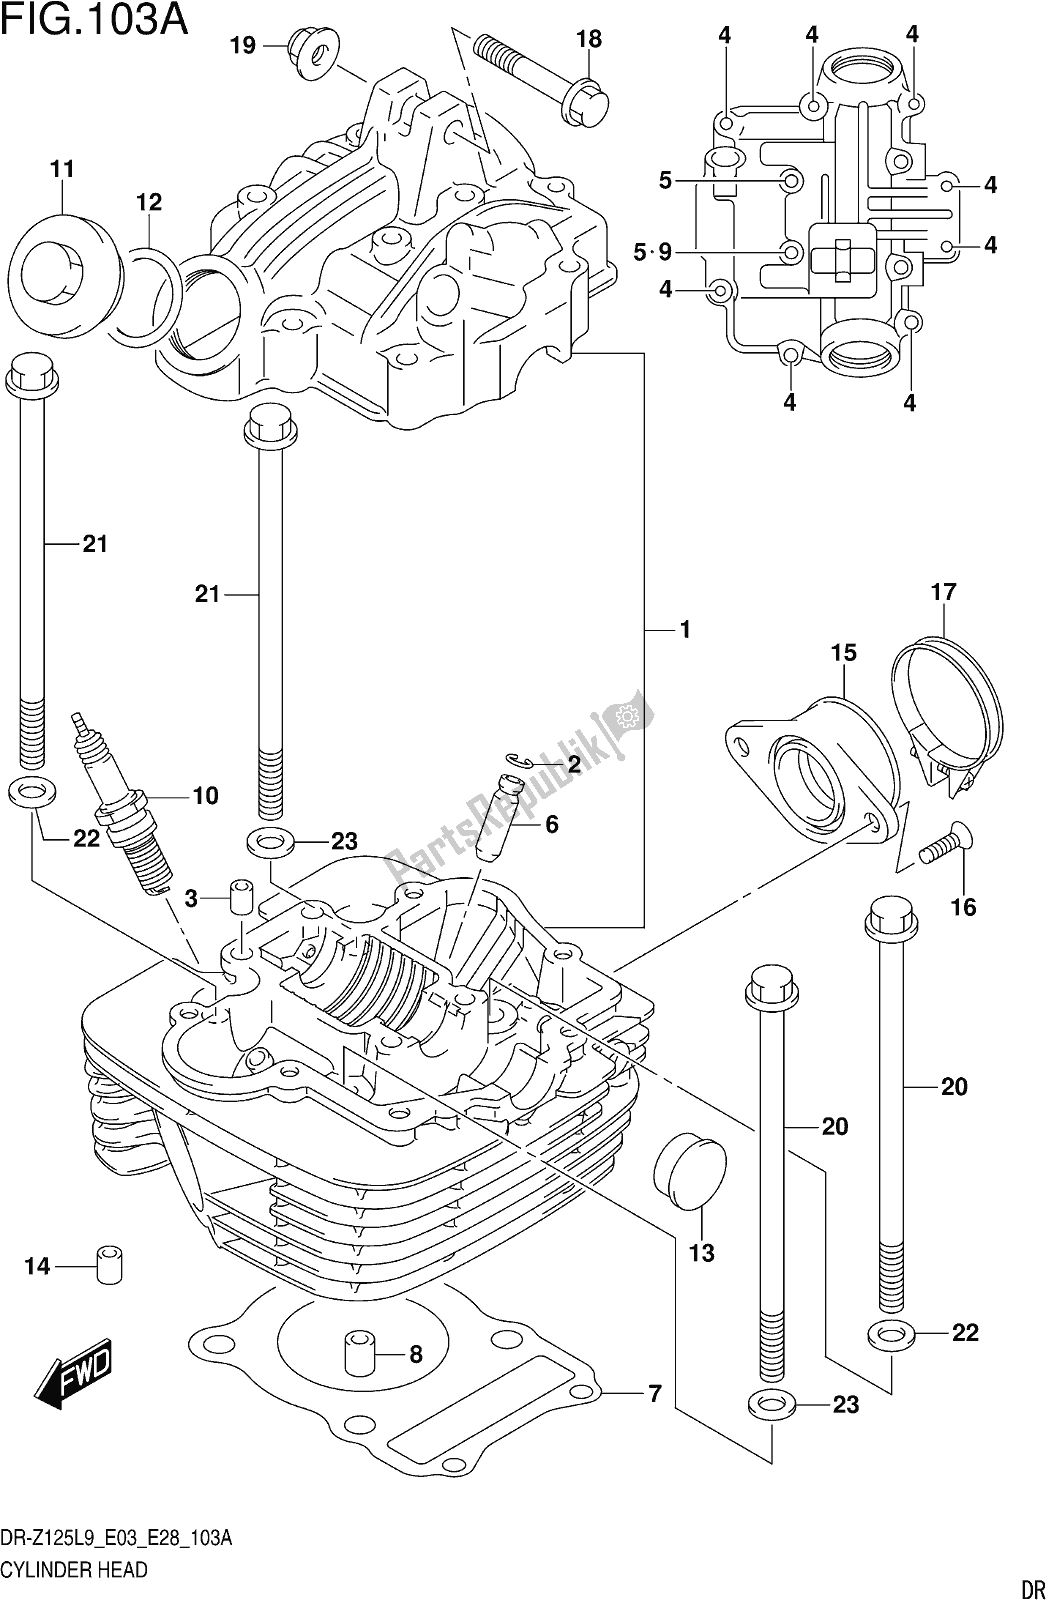 All parts for the Fig. 103a Cylinder Head of the Suzuki DR-Z 125 2019